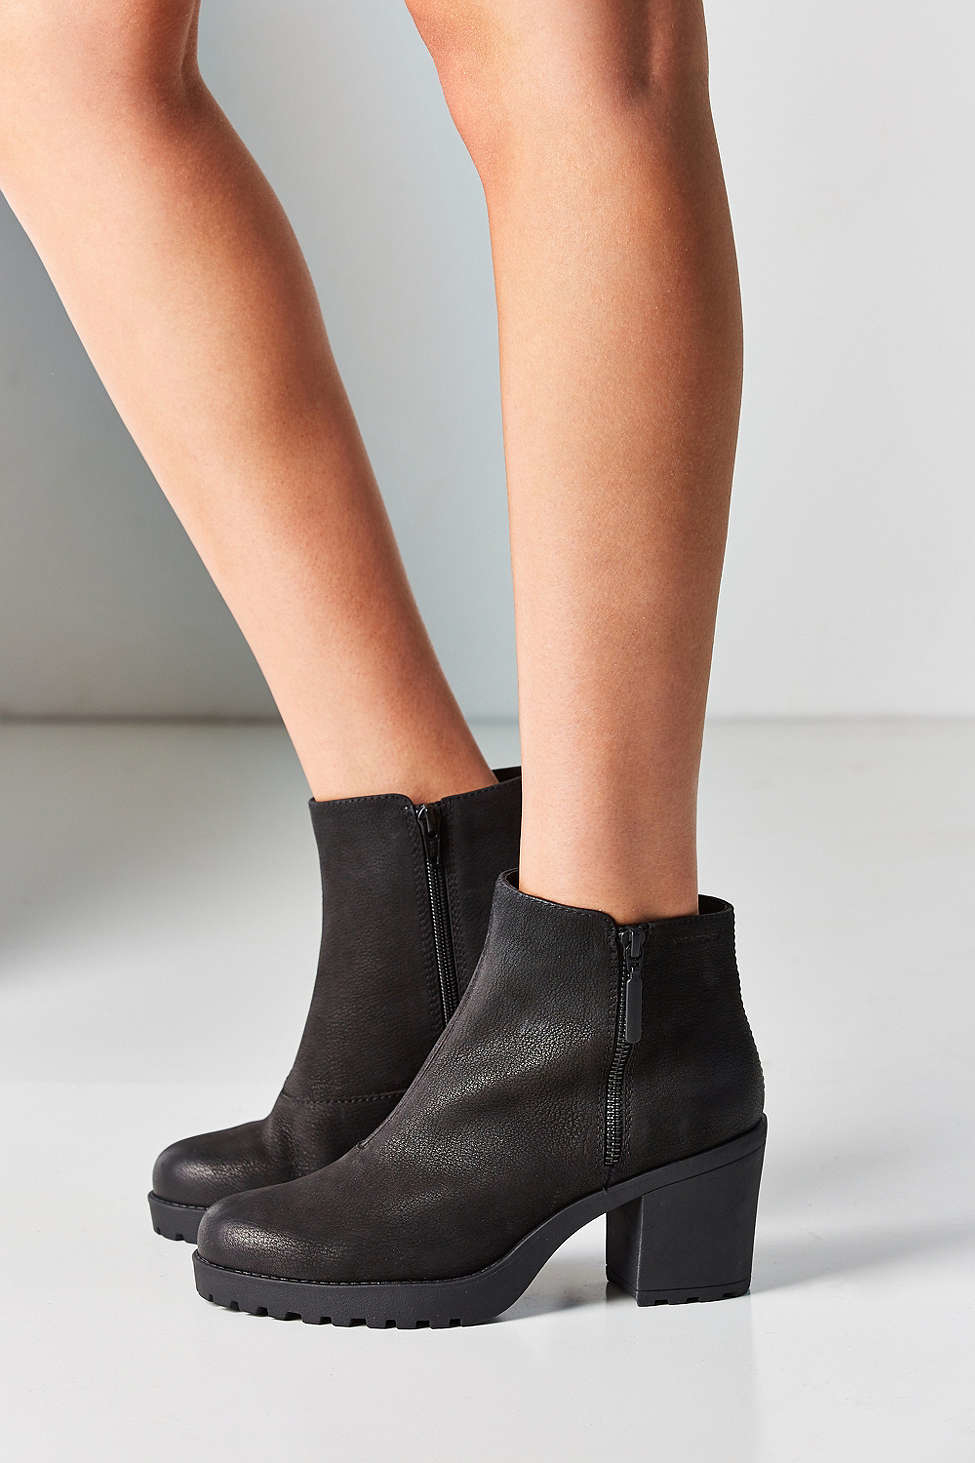 Vagabond Leather Nubuck Grace Double Zip Ankle Boot in Black - Lyst